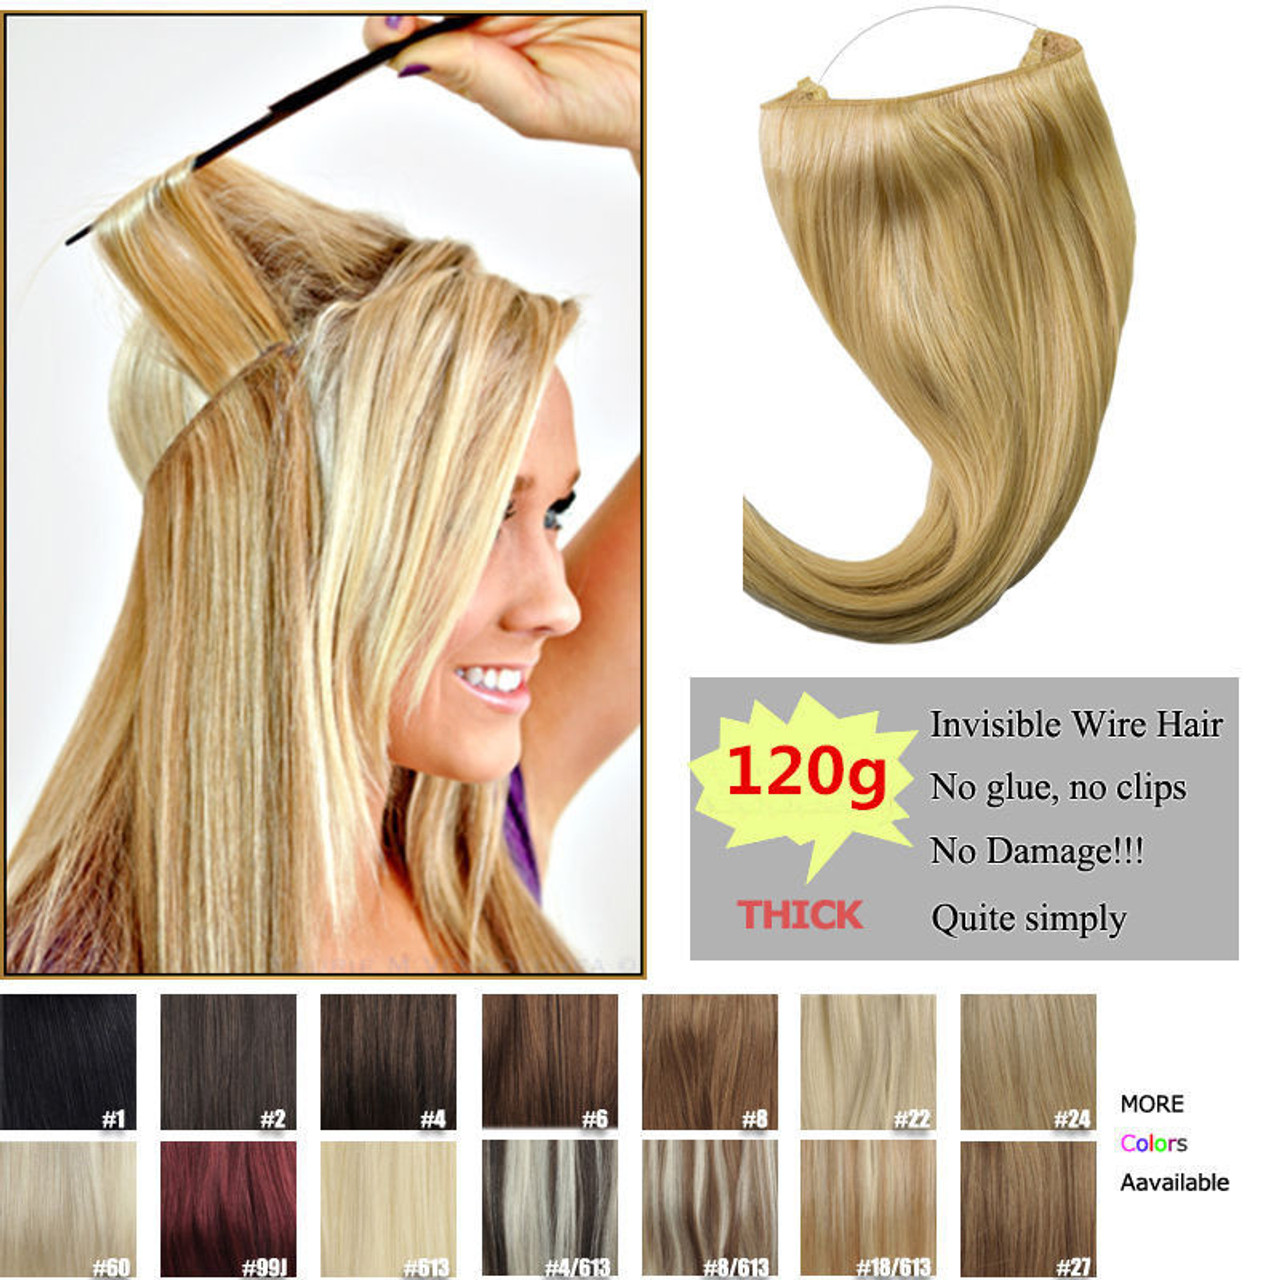 Remeehi 120g thick human remy secret invisible wire secret halo hair  extension any color 28cm